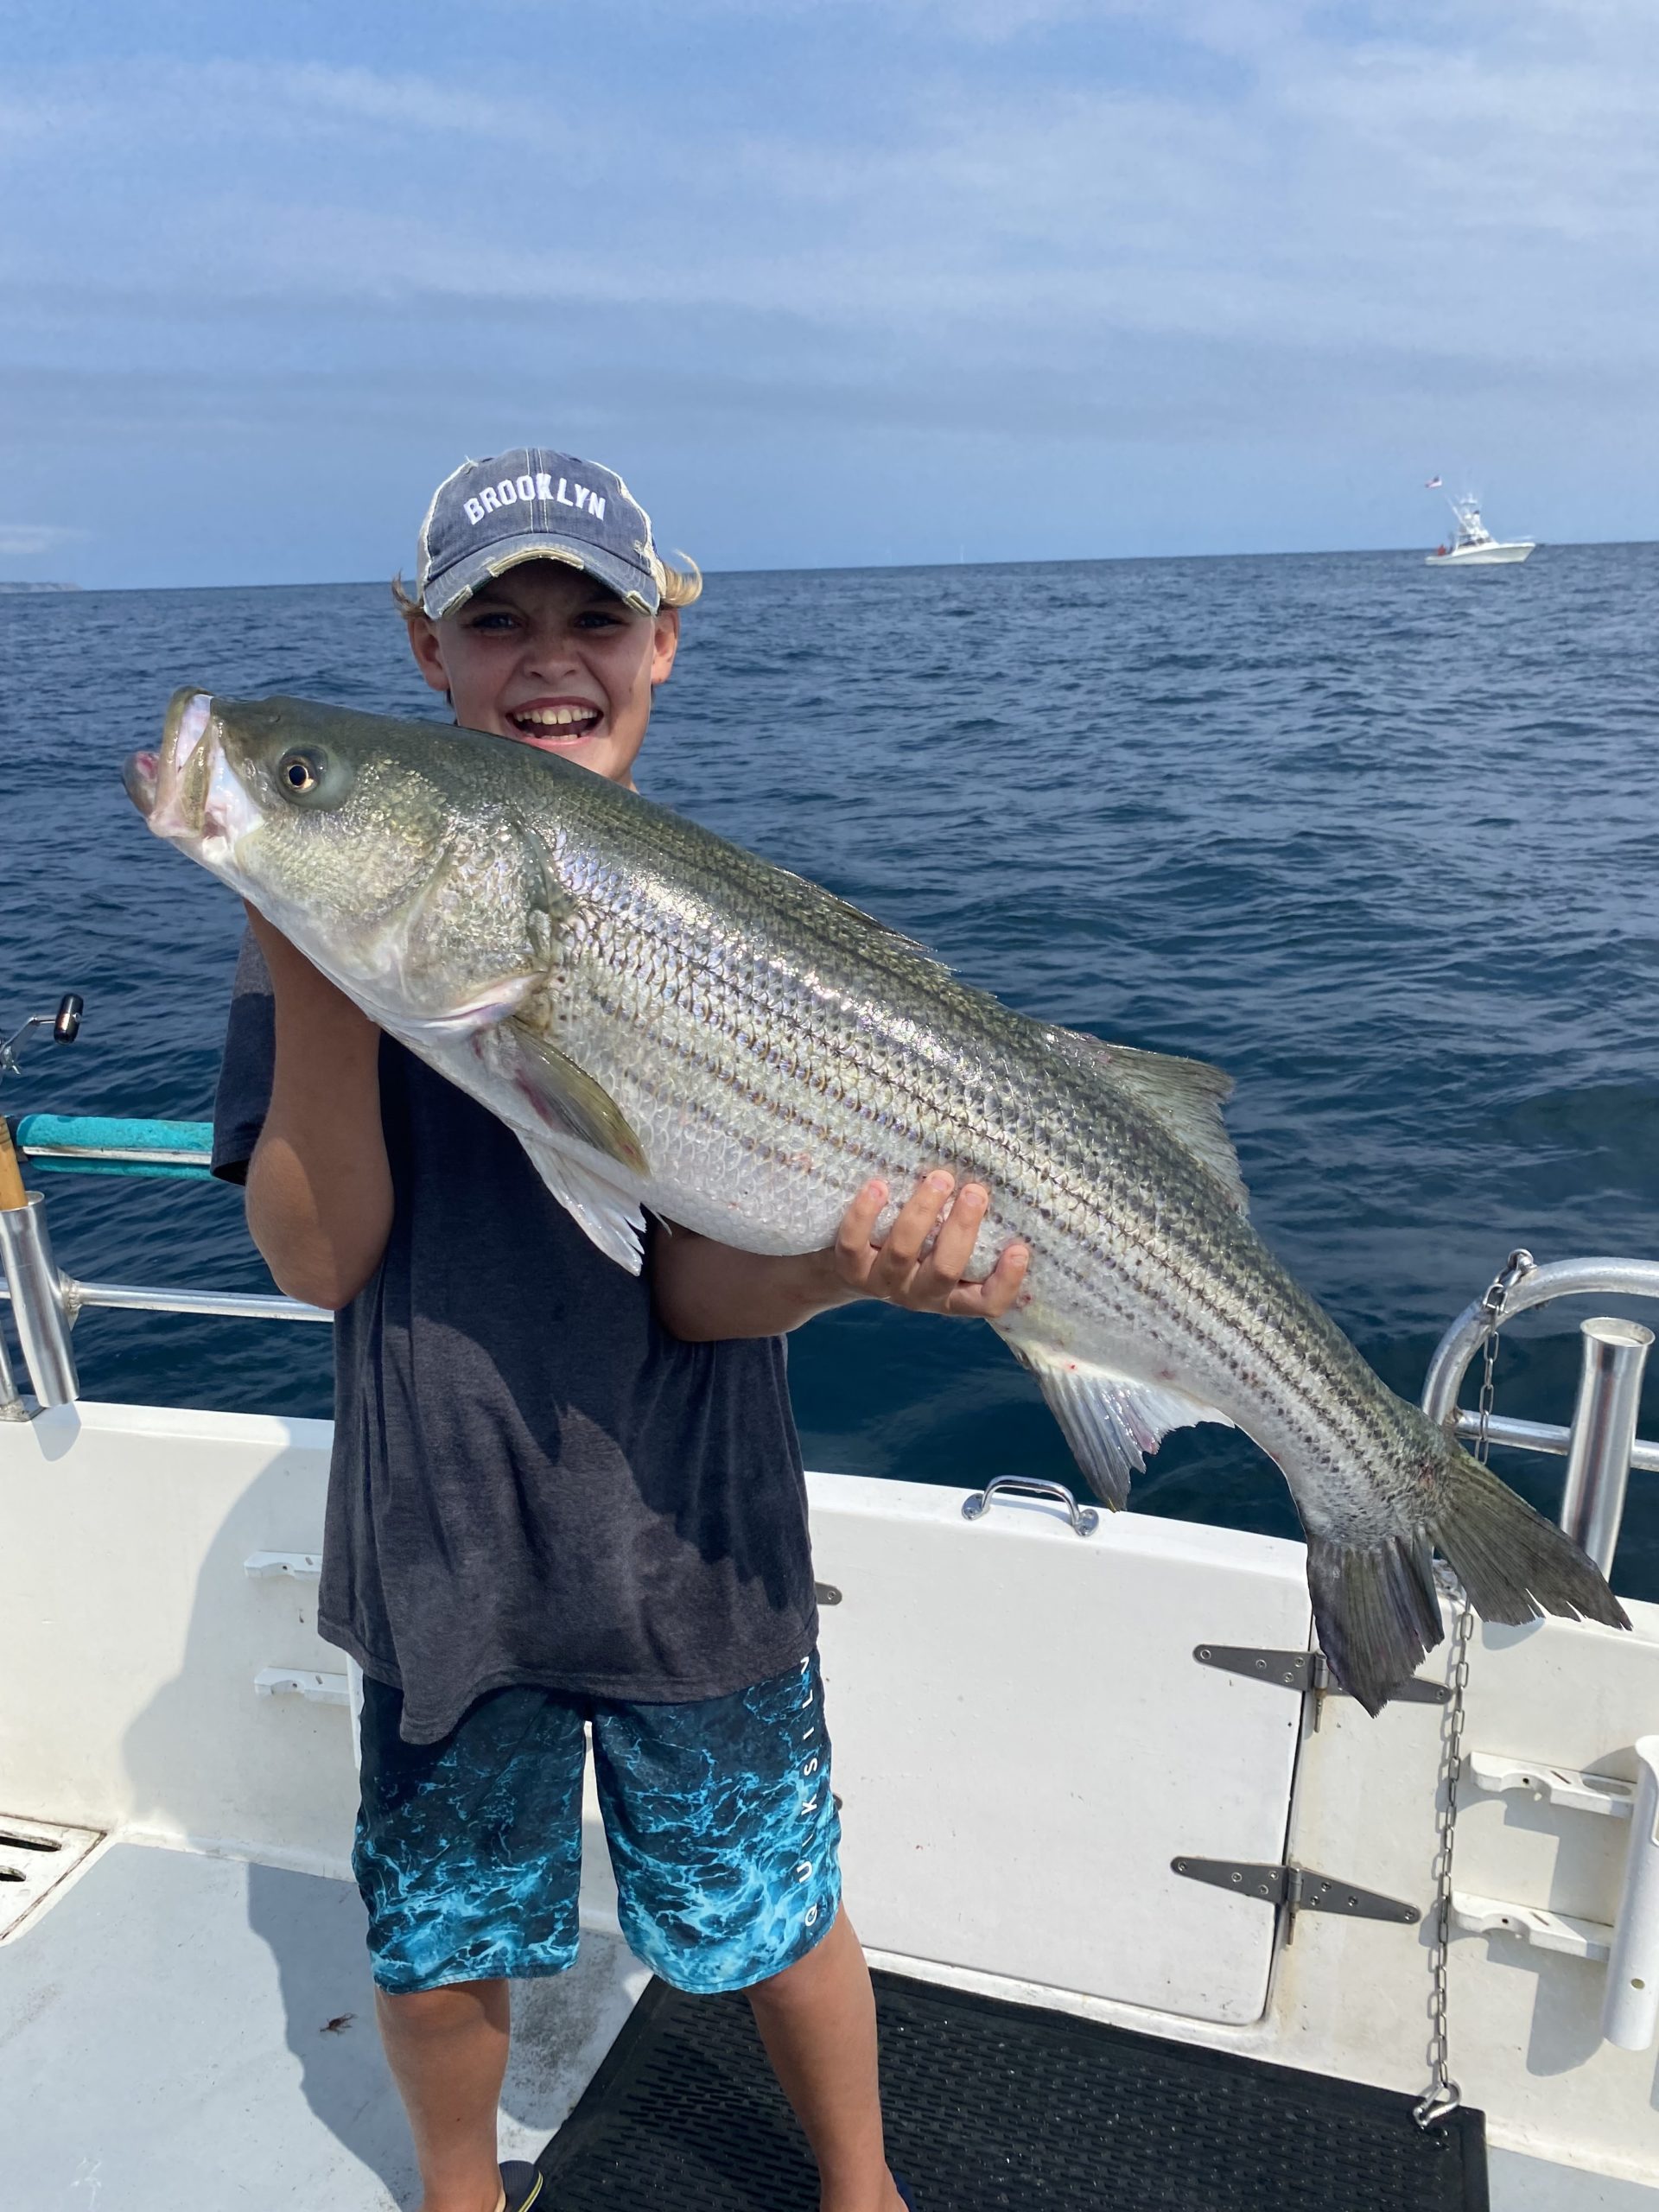 The future of big striped bass, like this one caught aboard the Double D out of Montauk last summer, and the big smiles they bring to faces are riding new guidelines for rebuilding the striper stock that will be open for public comment next month. Stay tuned....